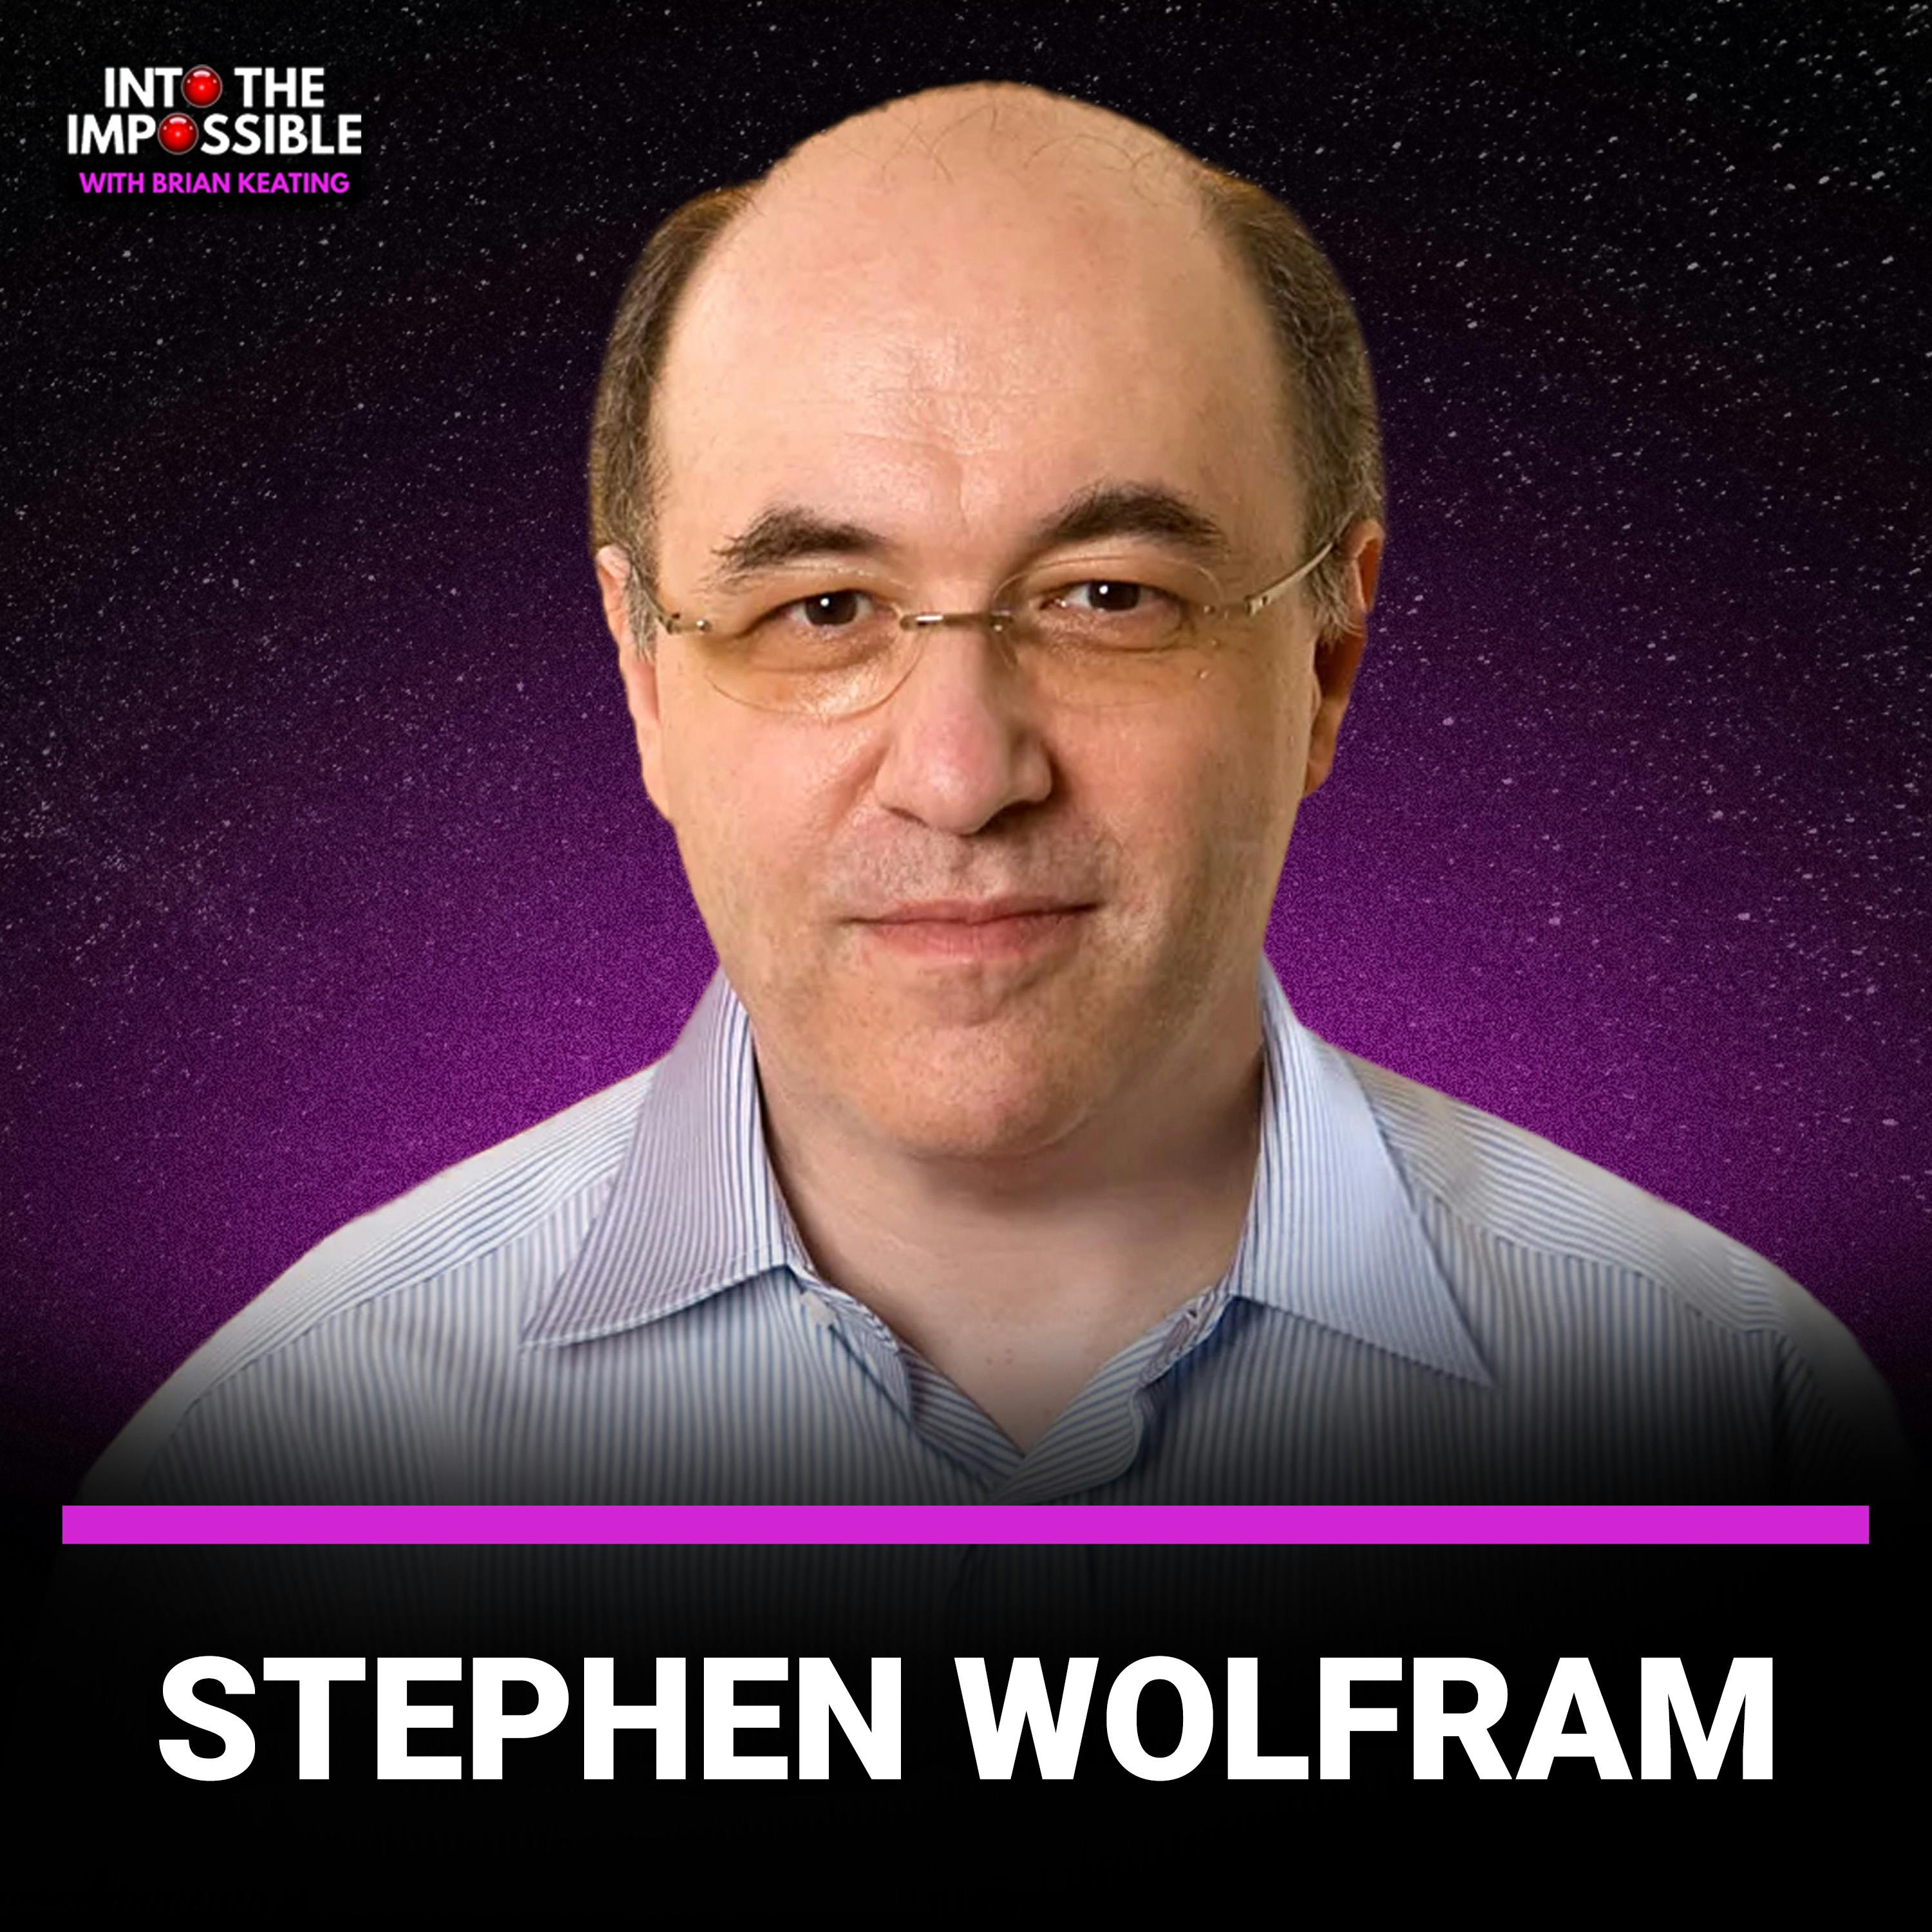 Did Stephen Wolfram Finally Prove the Second Law of Thermodynamics? (#388)